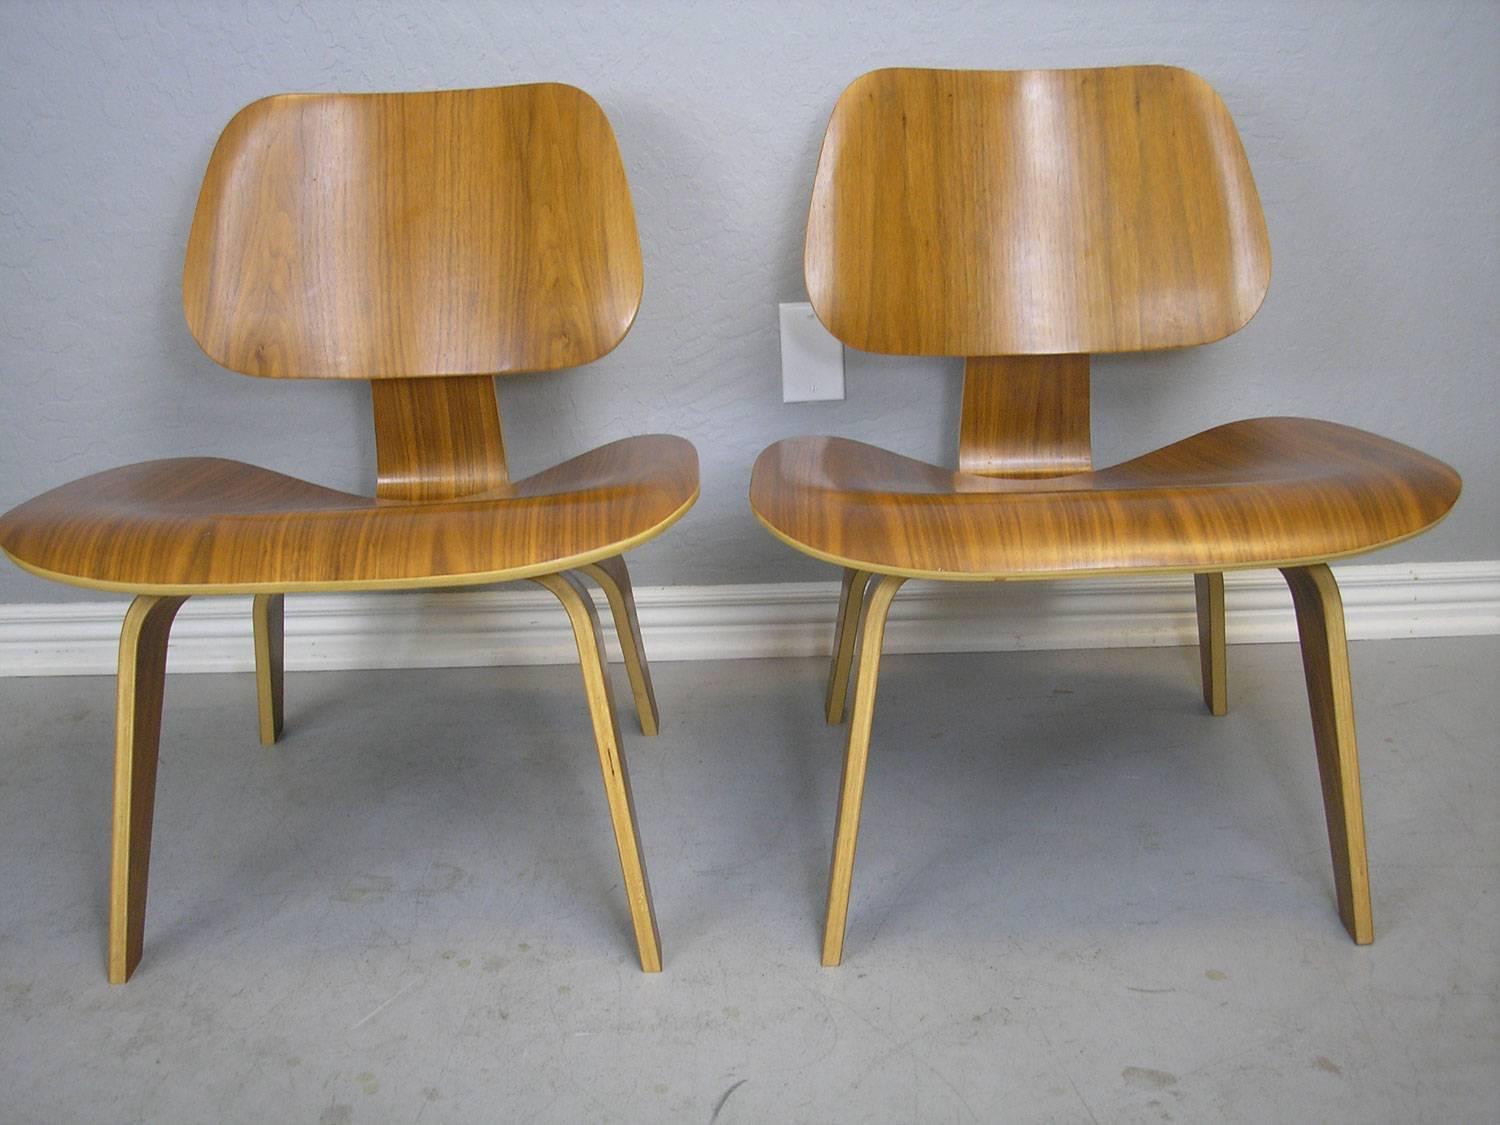 Iconic LCW lounge chair in walnut plywood designed by Charles and Ray Eames for Herman Miller. The veneer and chairs are in very good original condition and look very nice albeit with a couple of very small veneer chips near the edges. Manufactured